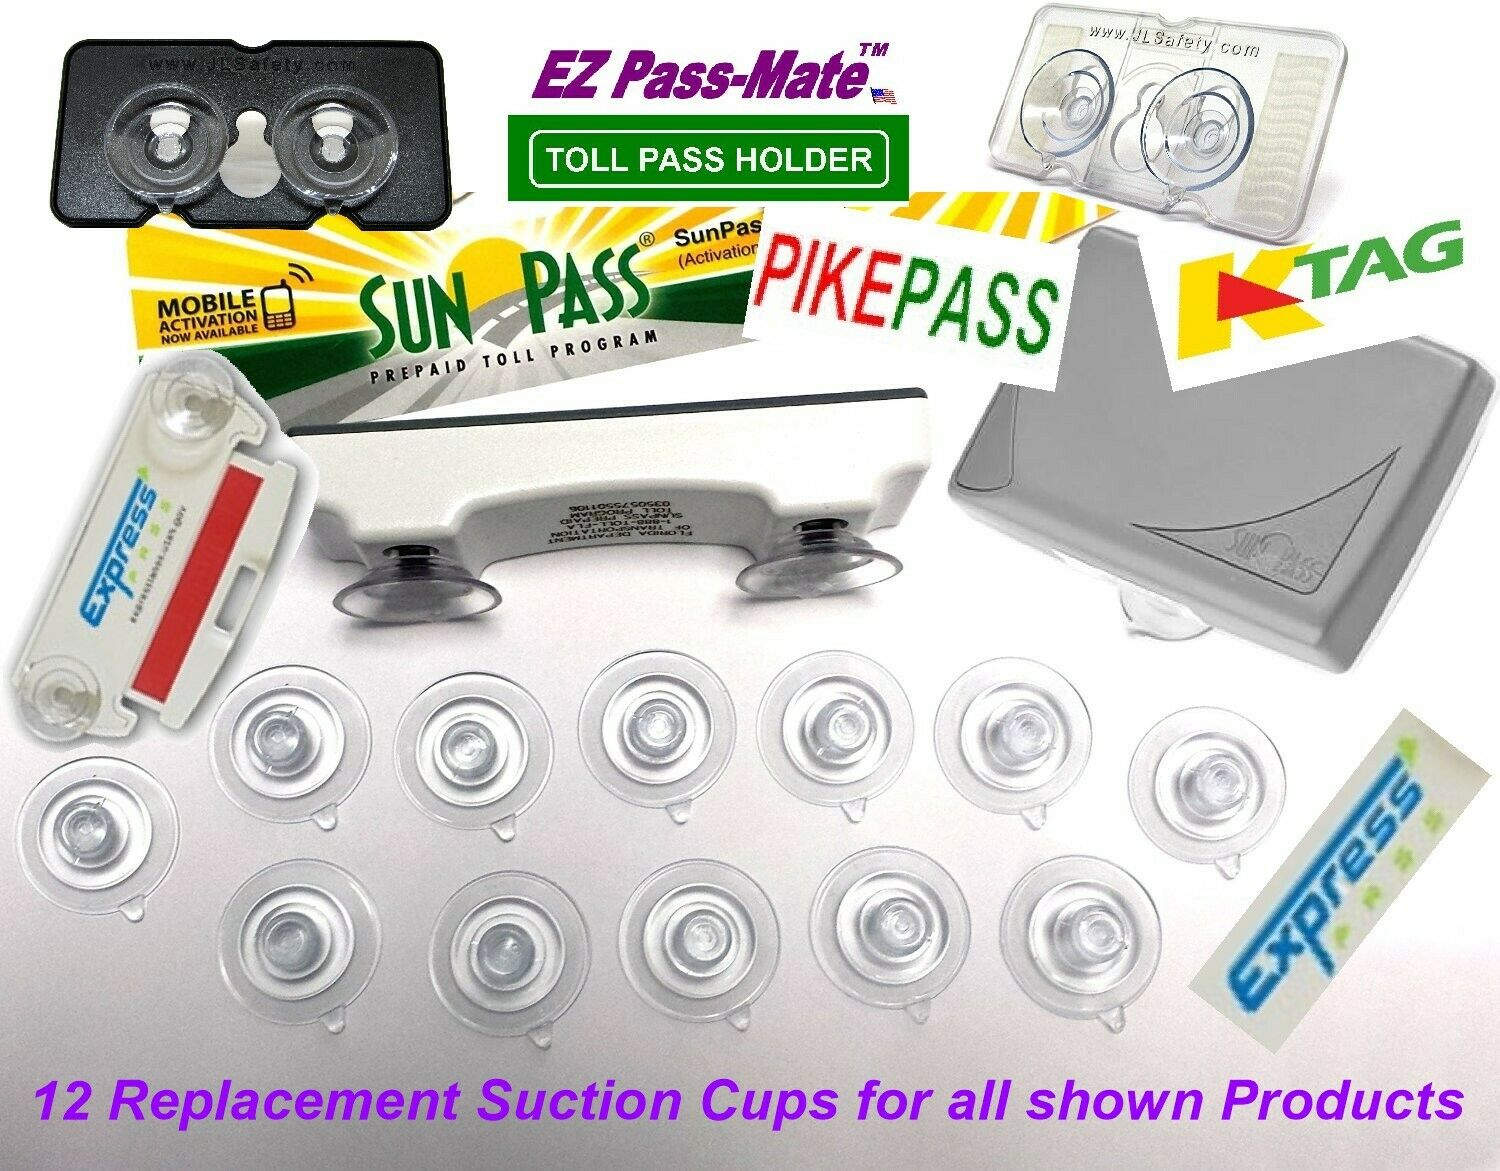 Replacement Suction Cup For Sunpass,pikepass,ktag,ez Pass-mate,exppass. 12 Pack